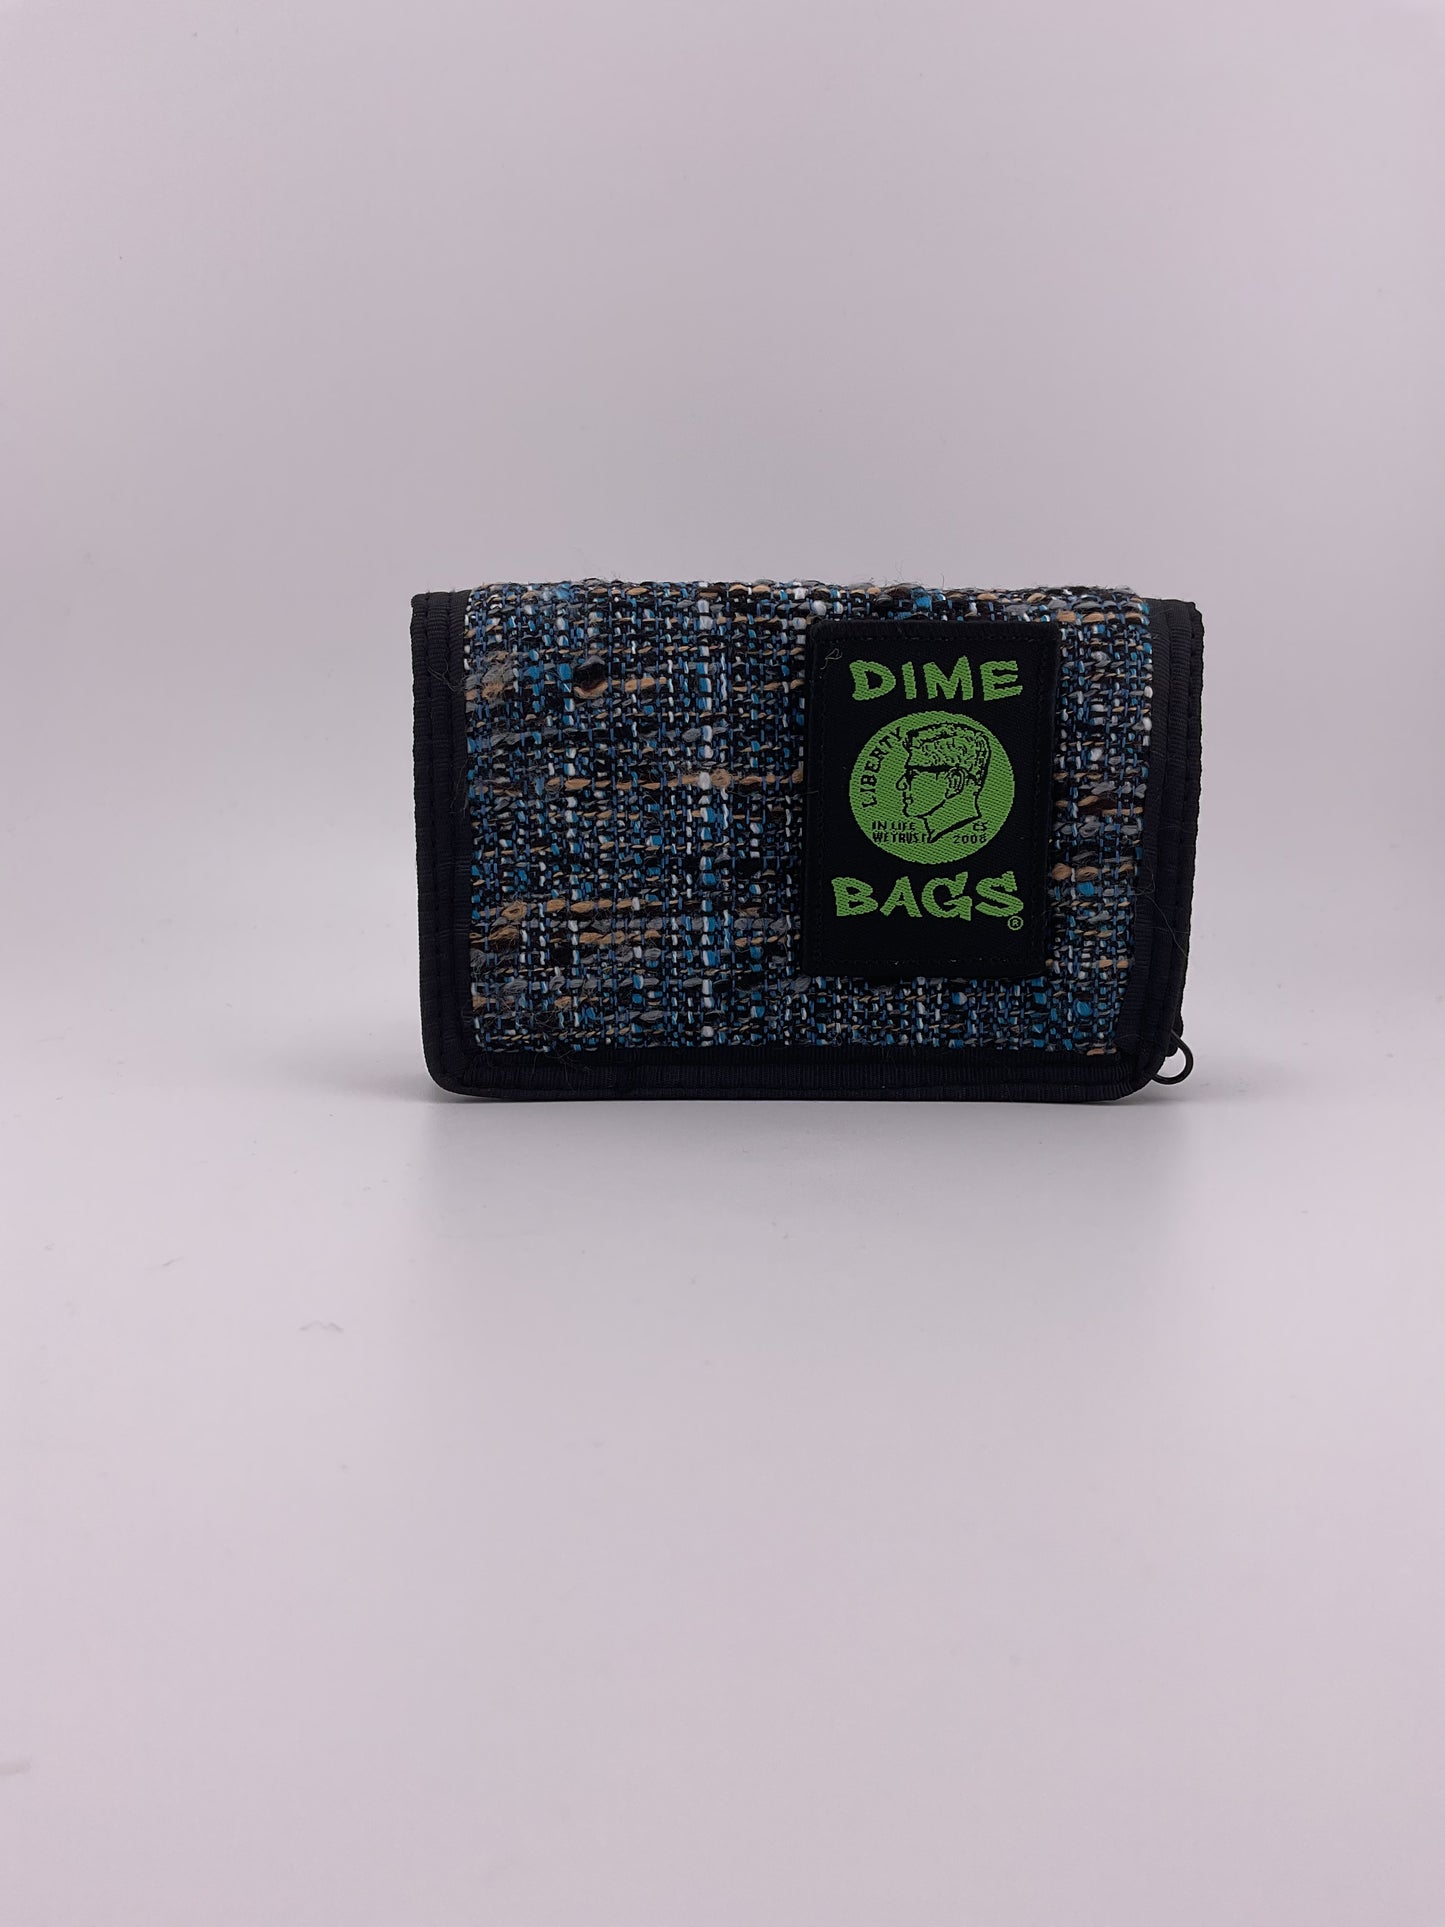 DIME BAGS Trifold Hempster Wallet - Classic Trifold Design w/Exterior Pocket and Interchangable Label